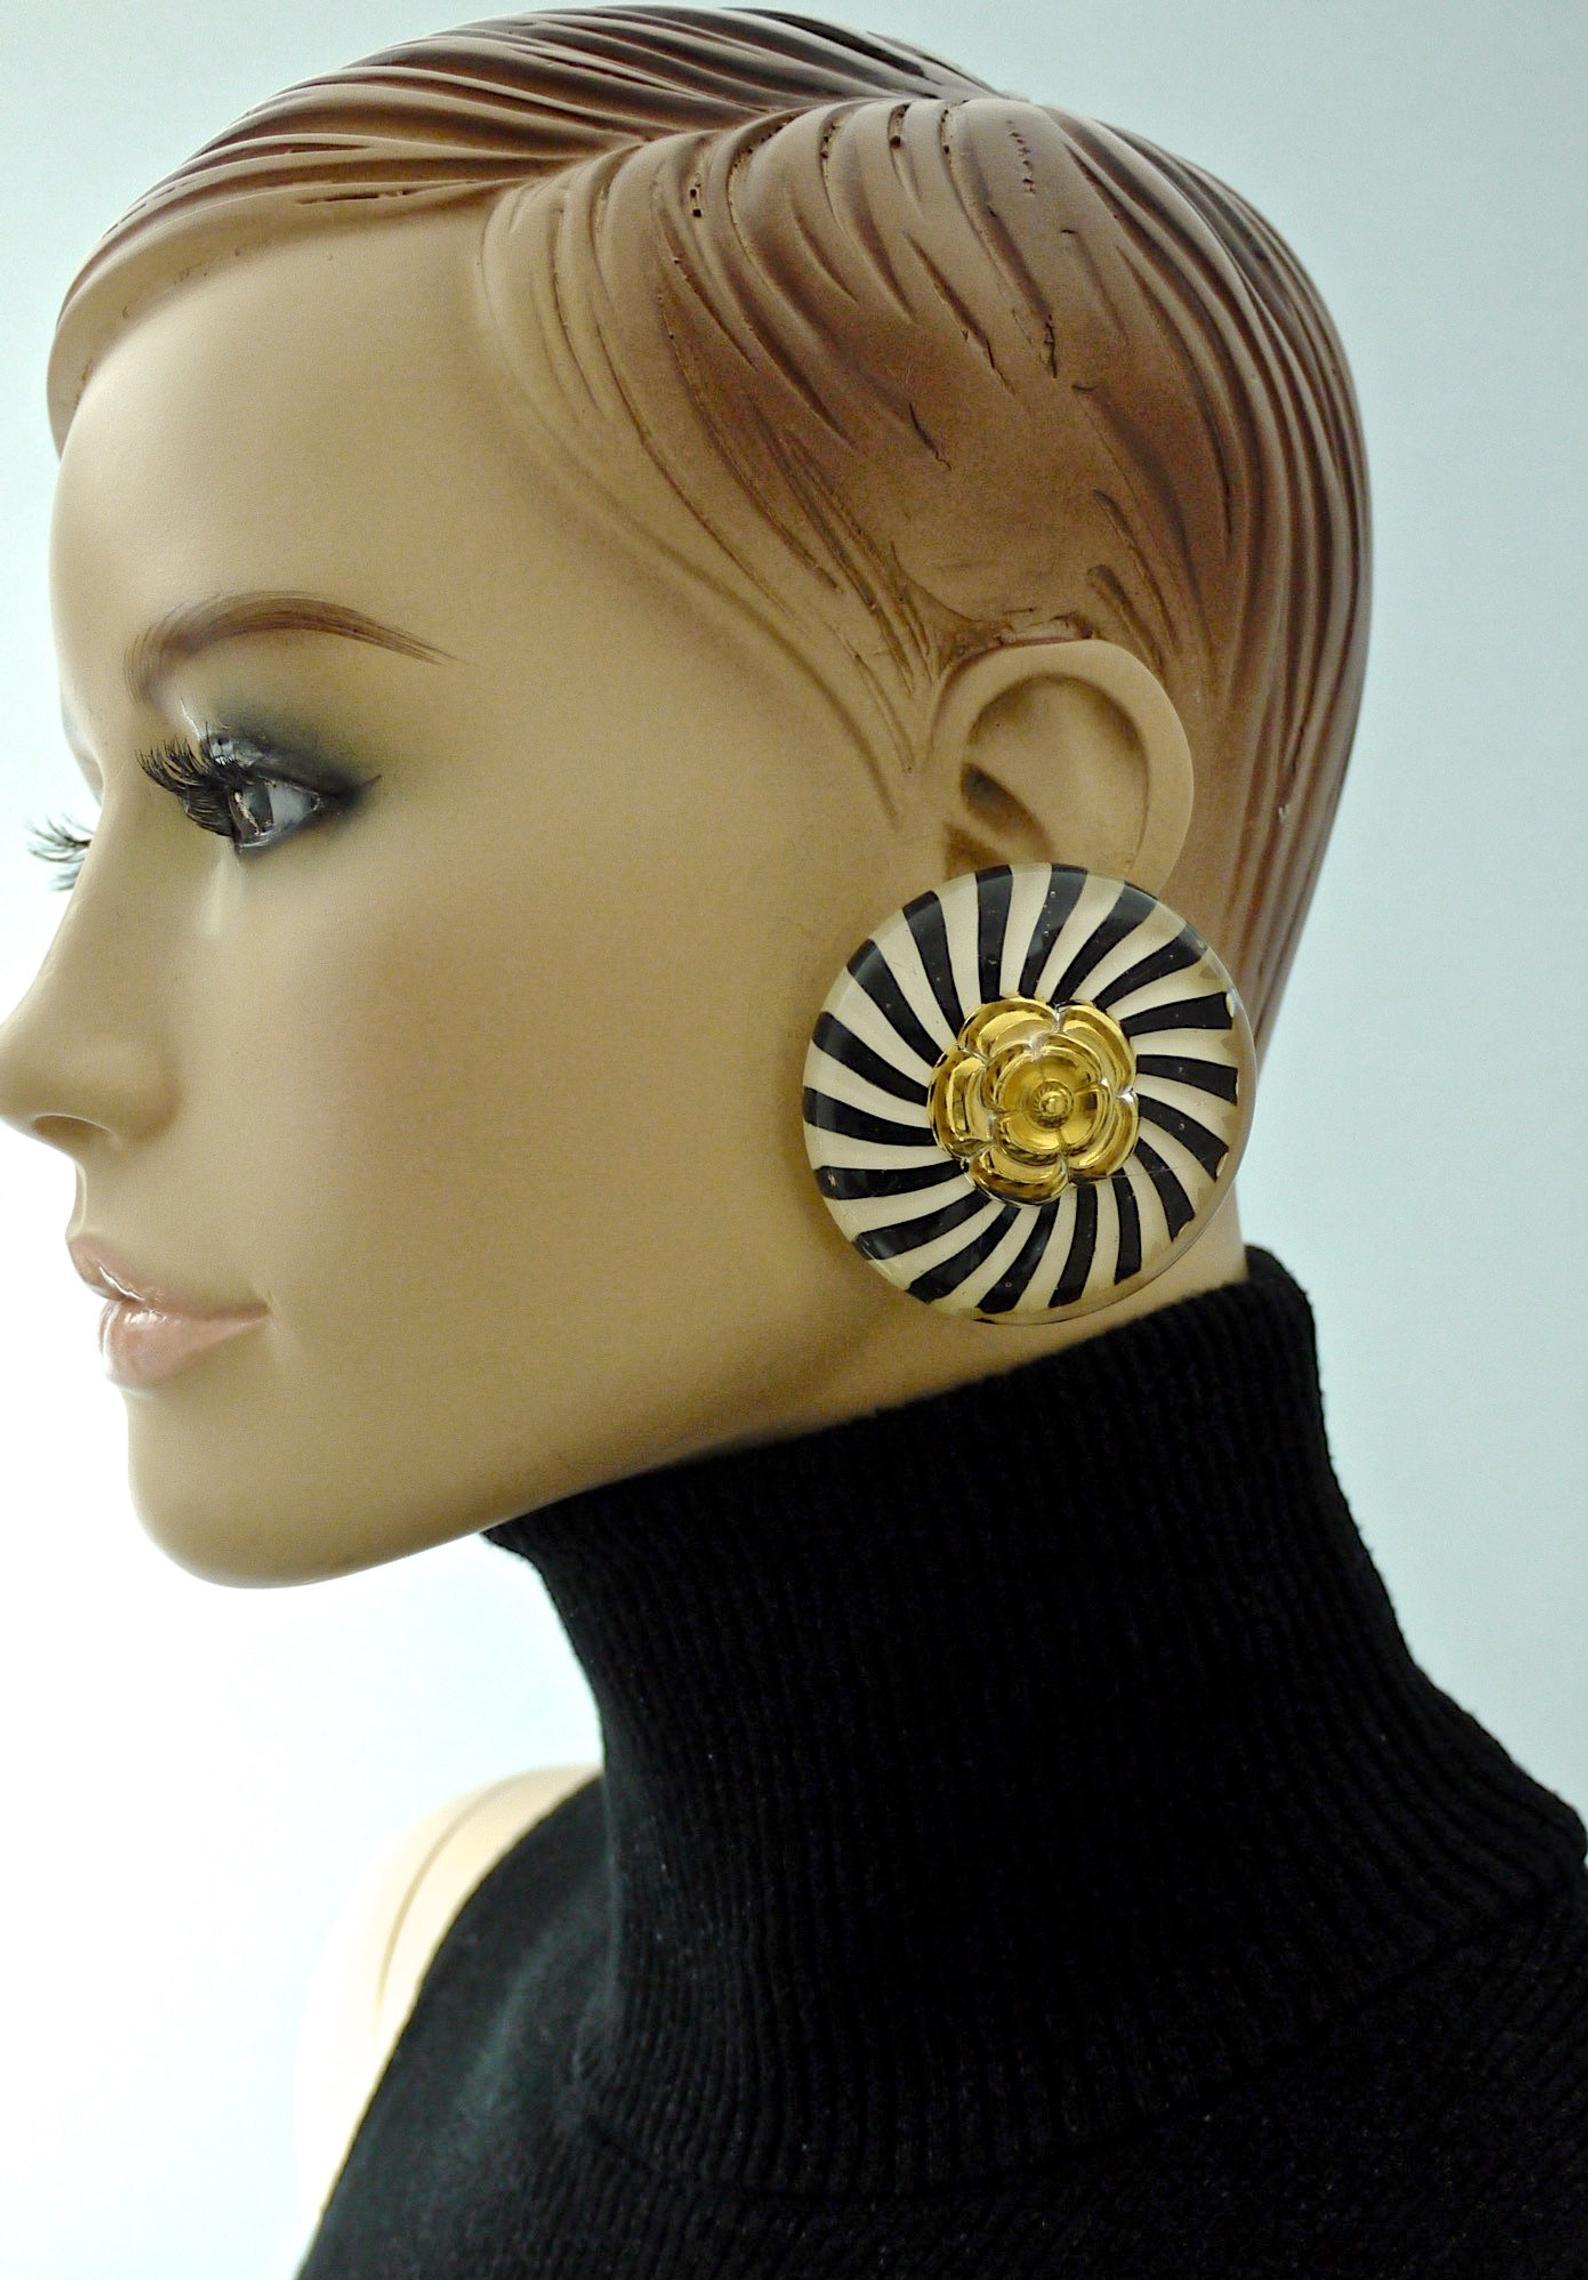 Vintage Massive CHANEL Camellia Stripe Lucite Earrings

Measurements:
Height: 2.16 inches (5.5 cm)
Width: 2.16 inches (5.5 cm)
Weight per Earring: 43 grams

Features:
- 100% Authentic CHANEL.
- Iconic Camellia centrepiece.
- Massive lucite resin